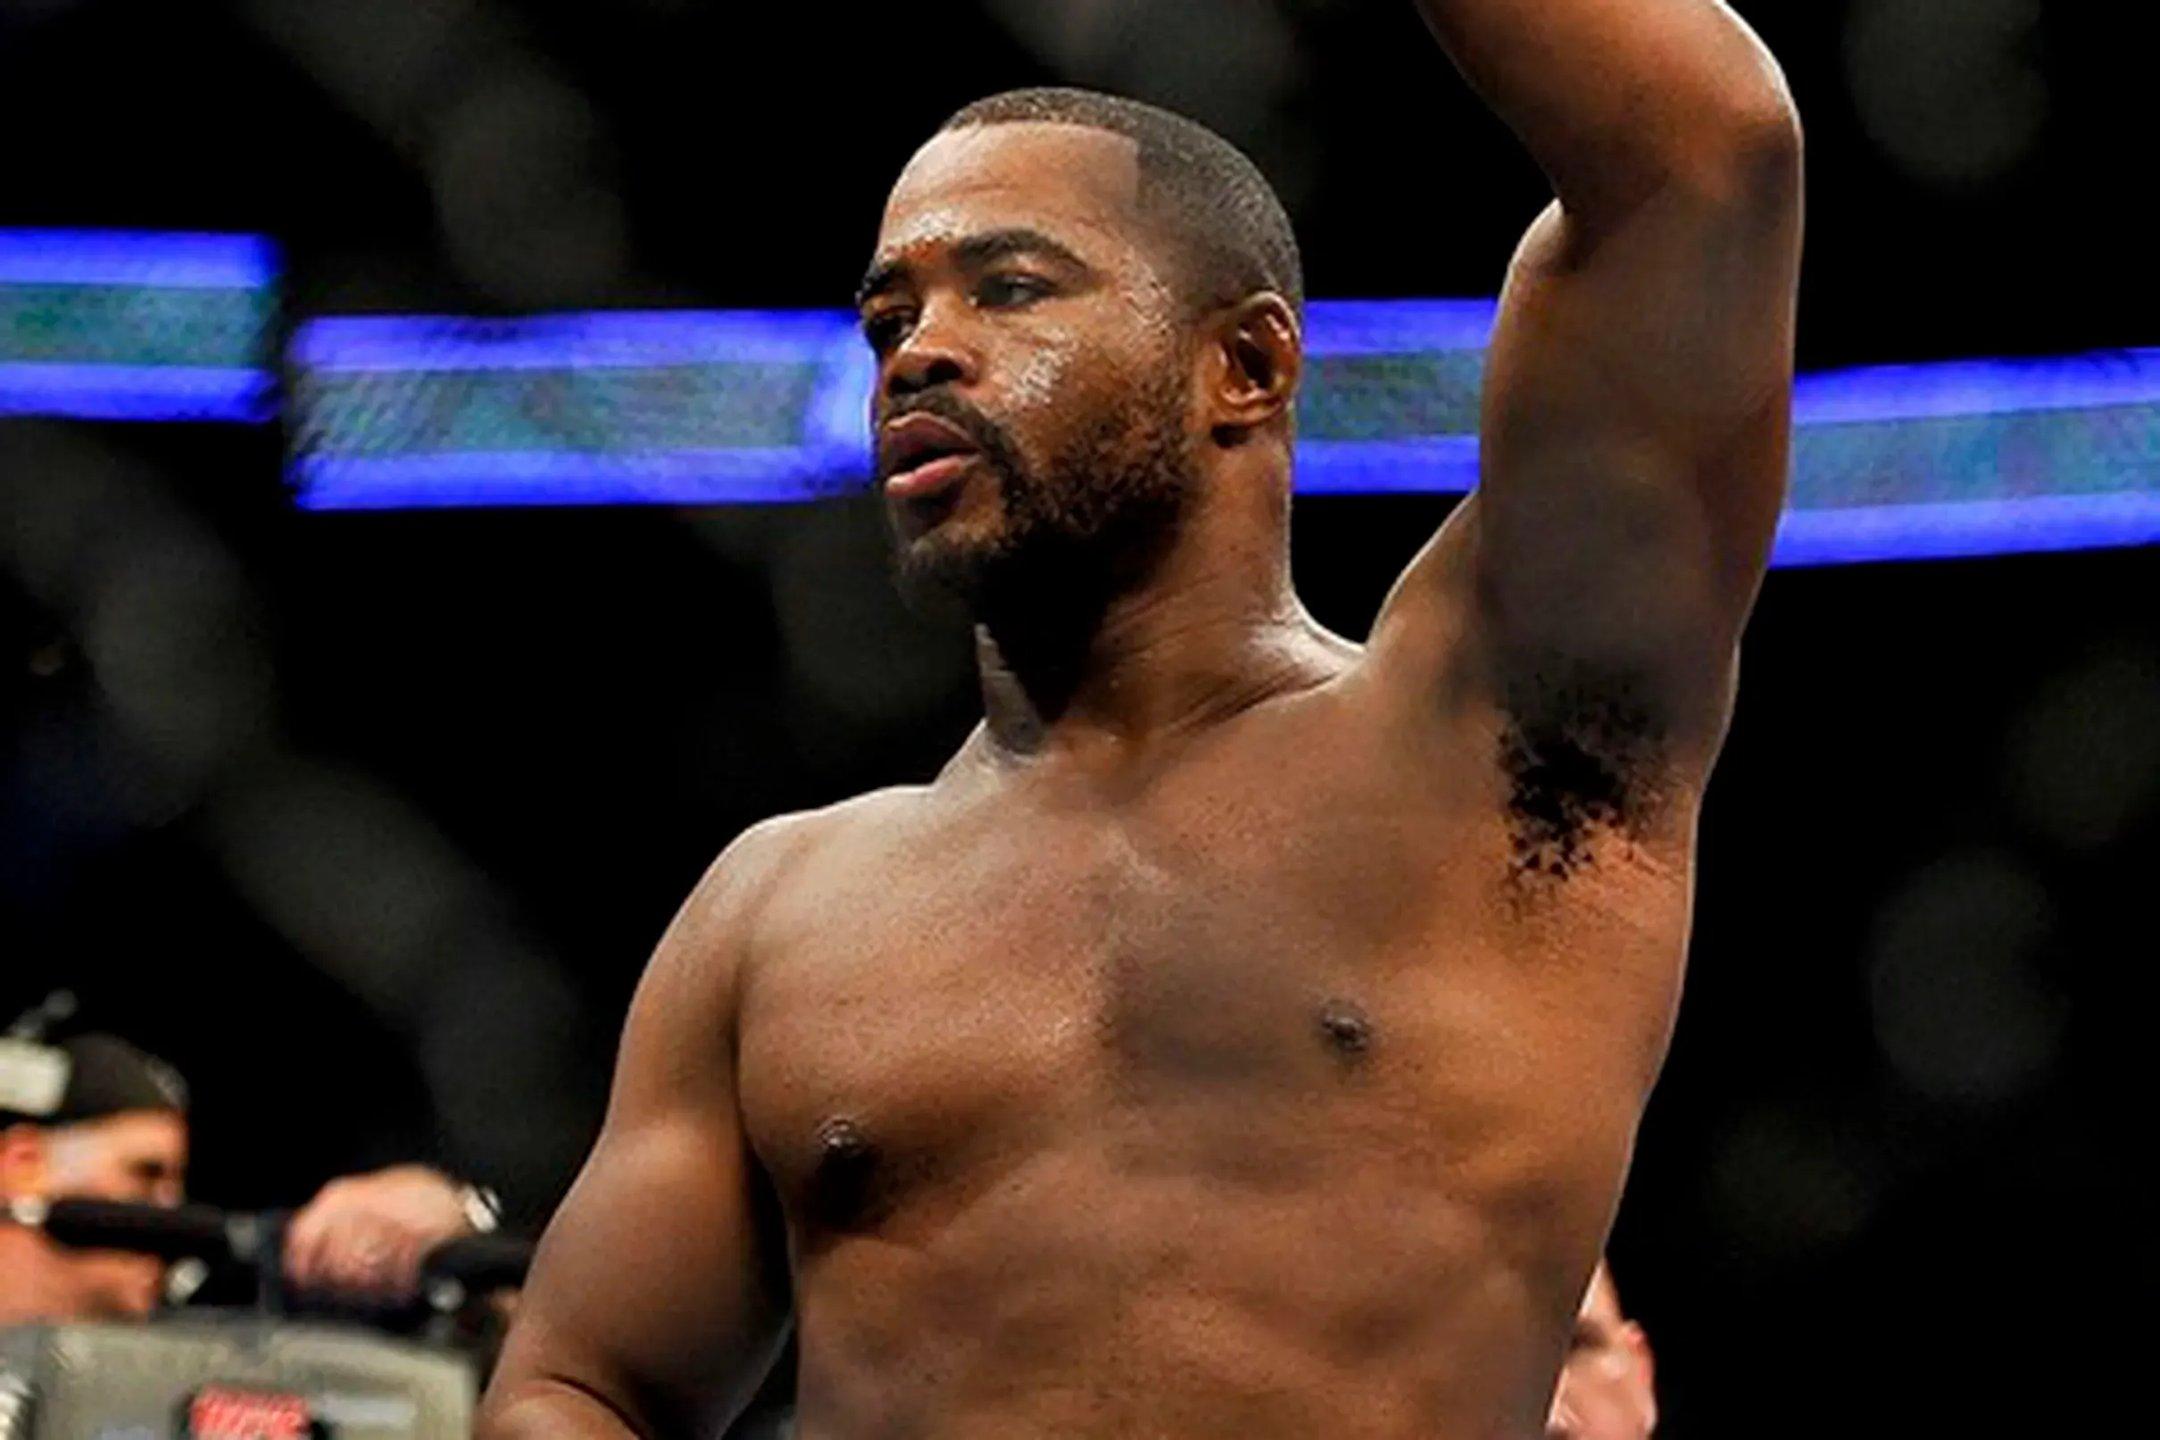 Rashad Evans wins a unanimous decision over Brad Imes to earn his UFC contract. Credits to: Paul Abell-US PRESSWIRE.